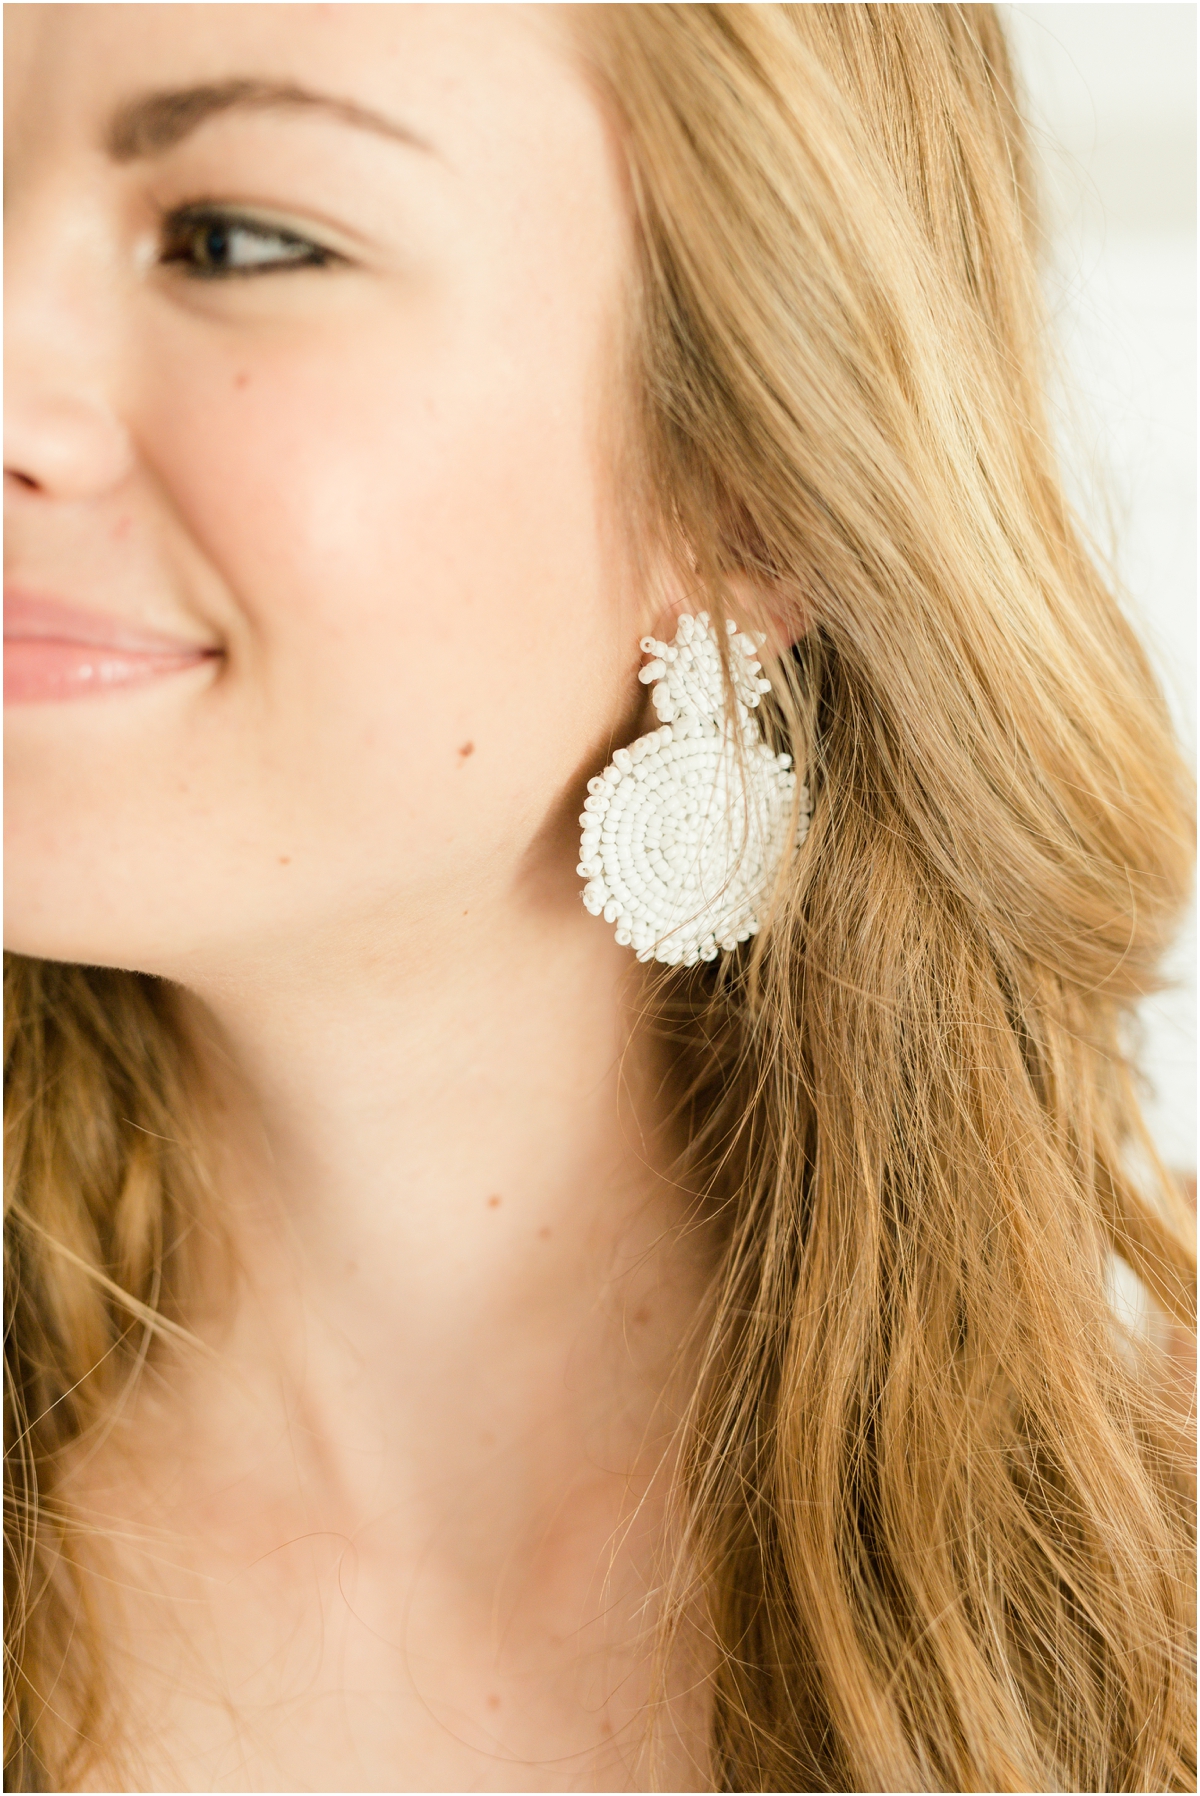 statement earrings apart of Summer friday favorites | Jacqueline & Laura